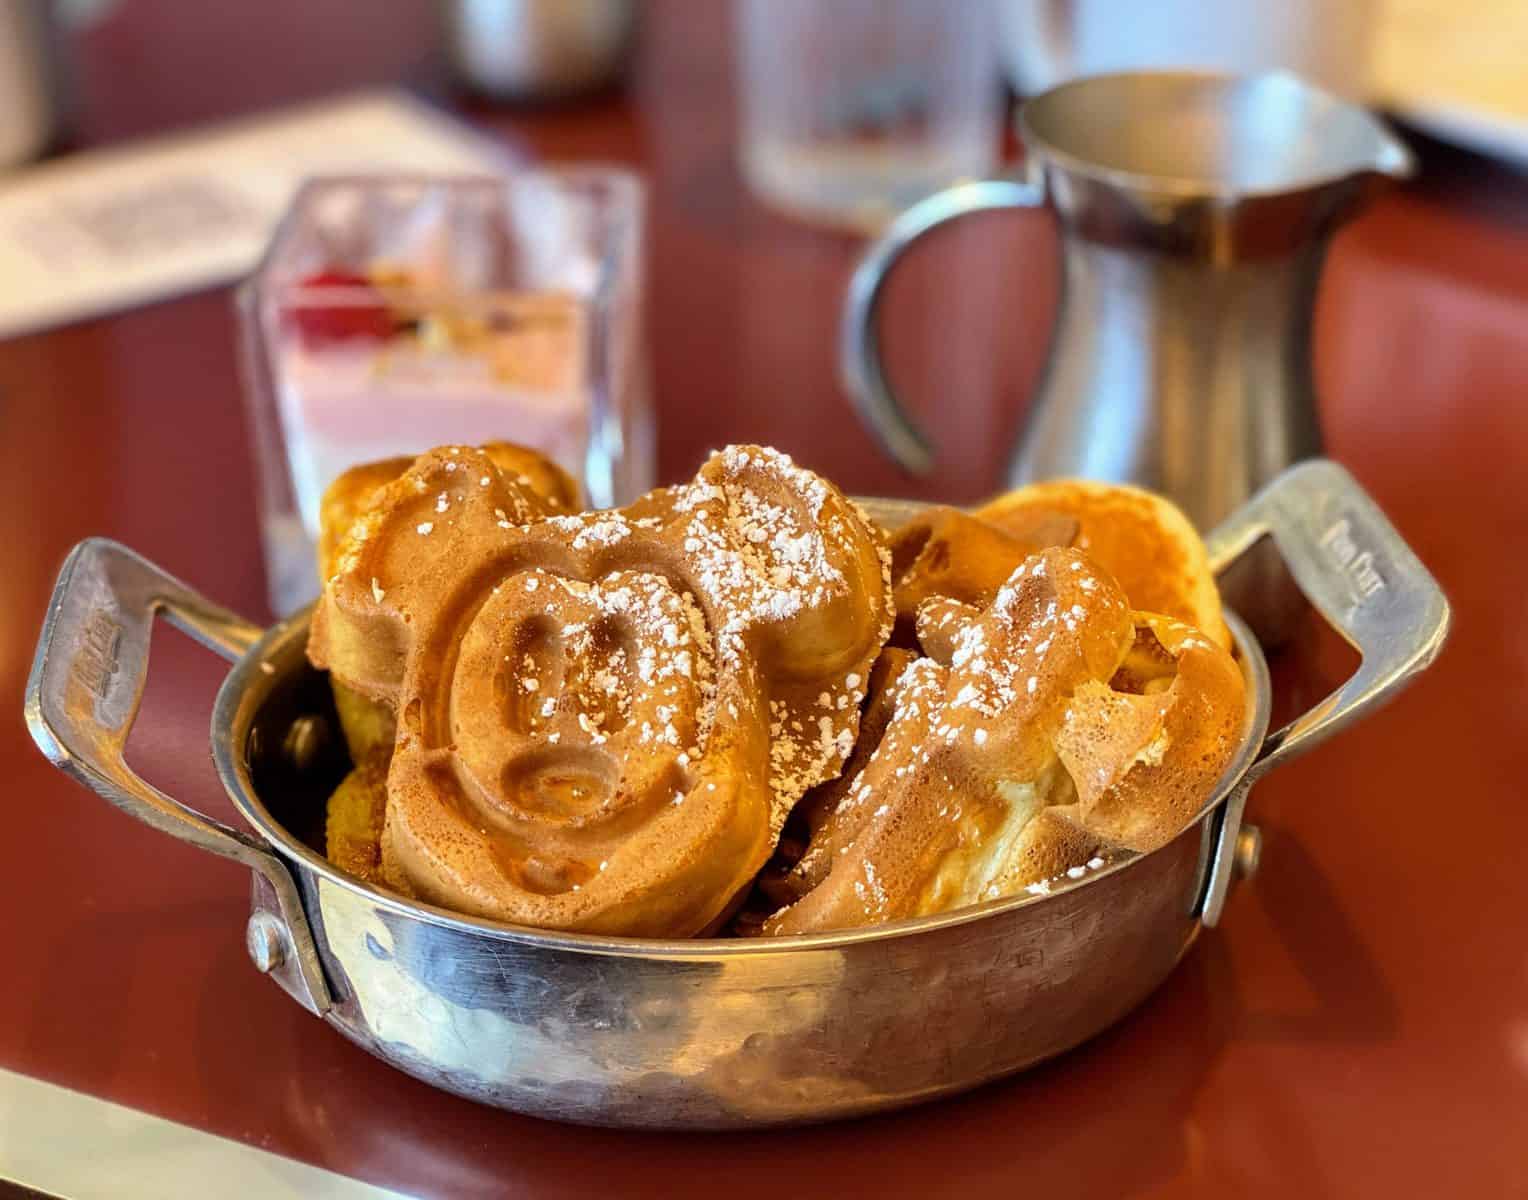 Dining at Disney World (what’s open right now and how it all works)